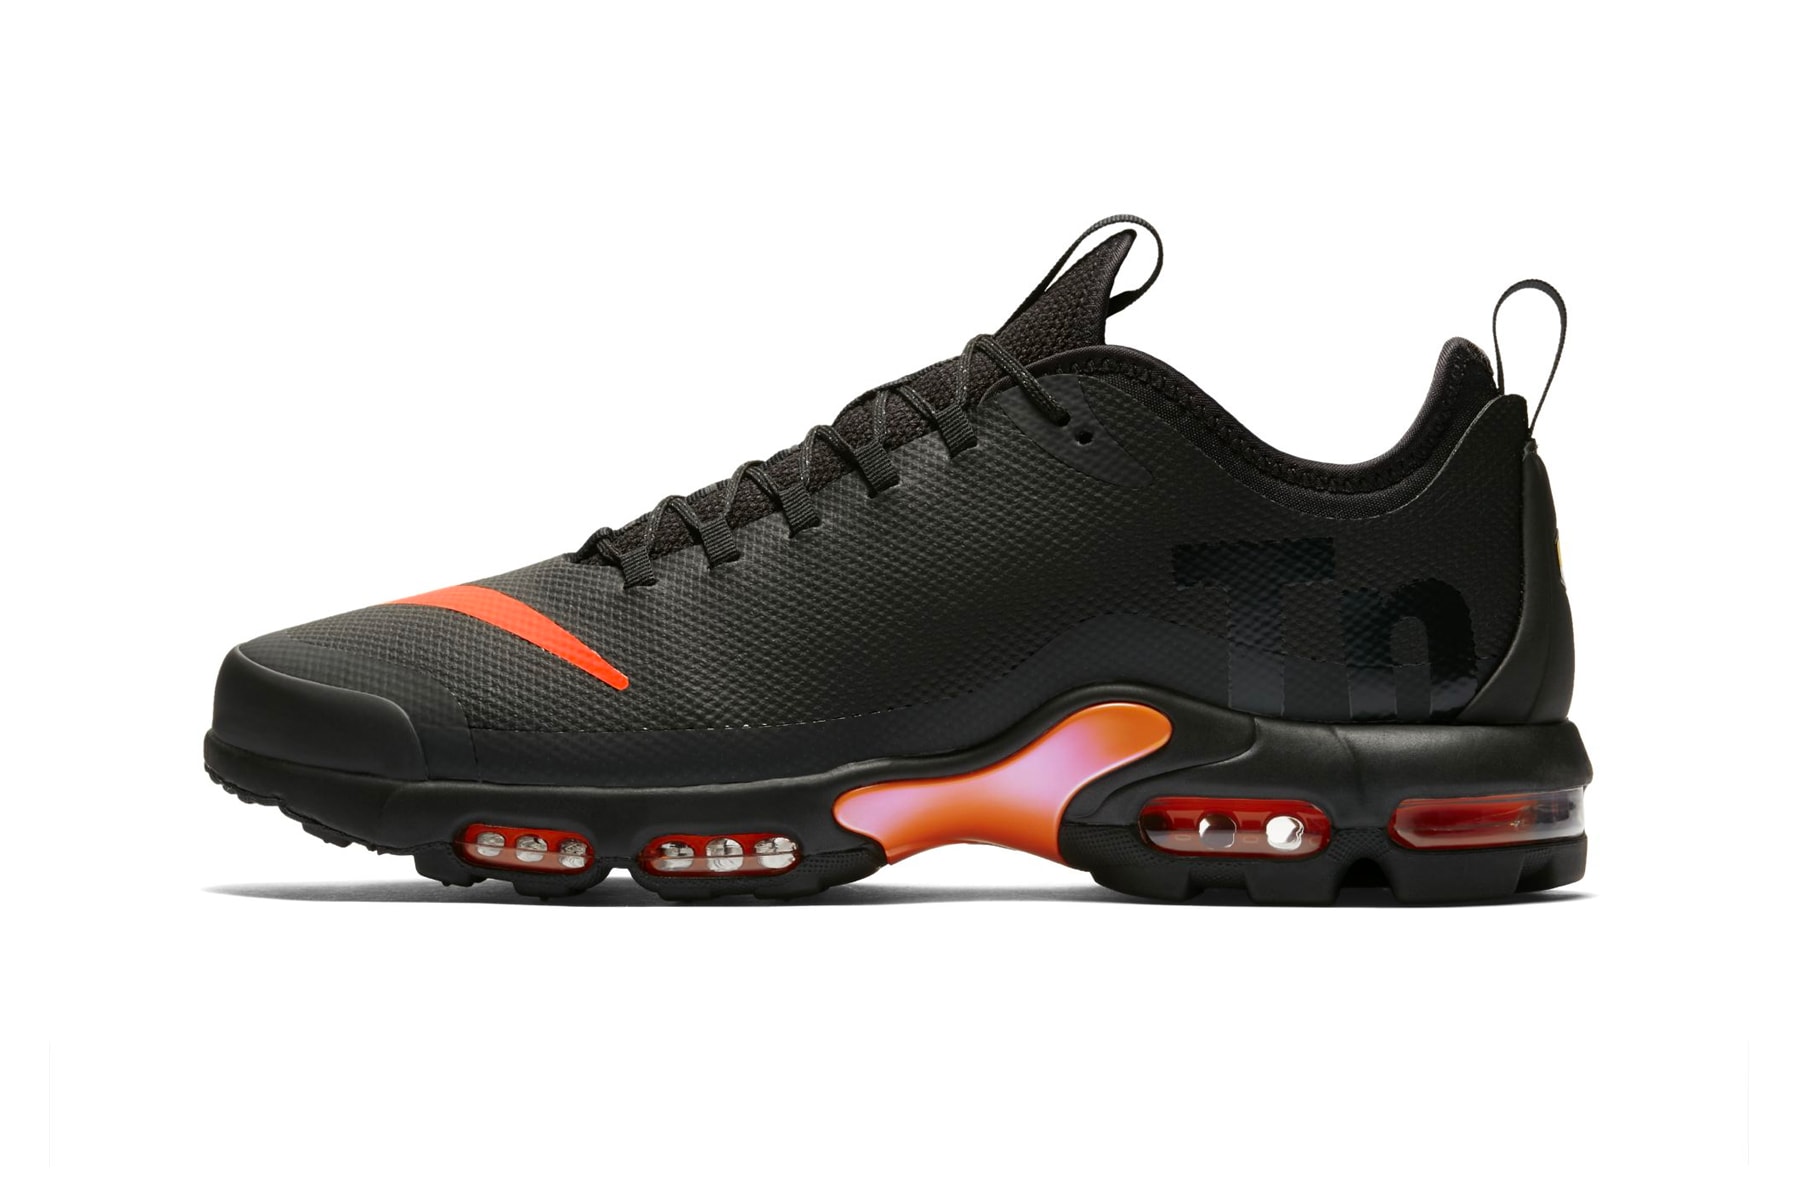 The Nike Air Max Plus 3 Arrives in a Military-Inspired Colourway